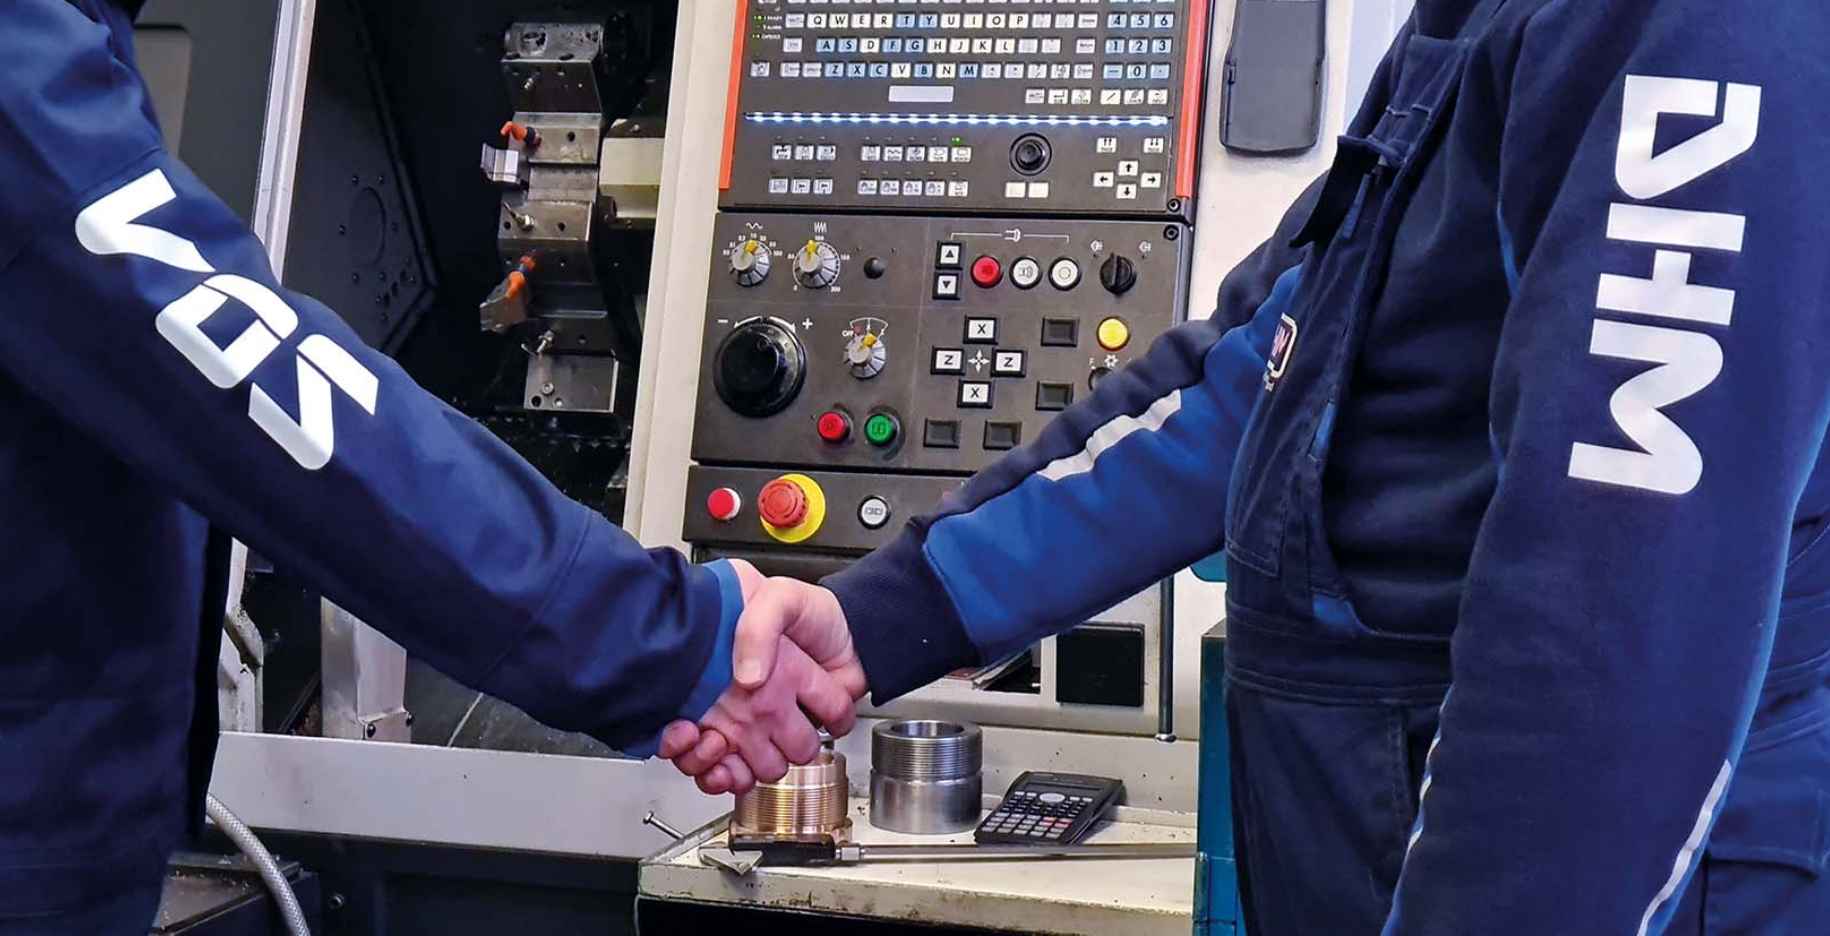 Two people in a Vos and DHM outfit shaking hands